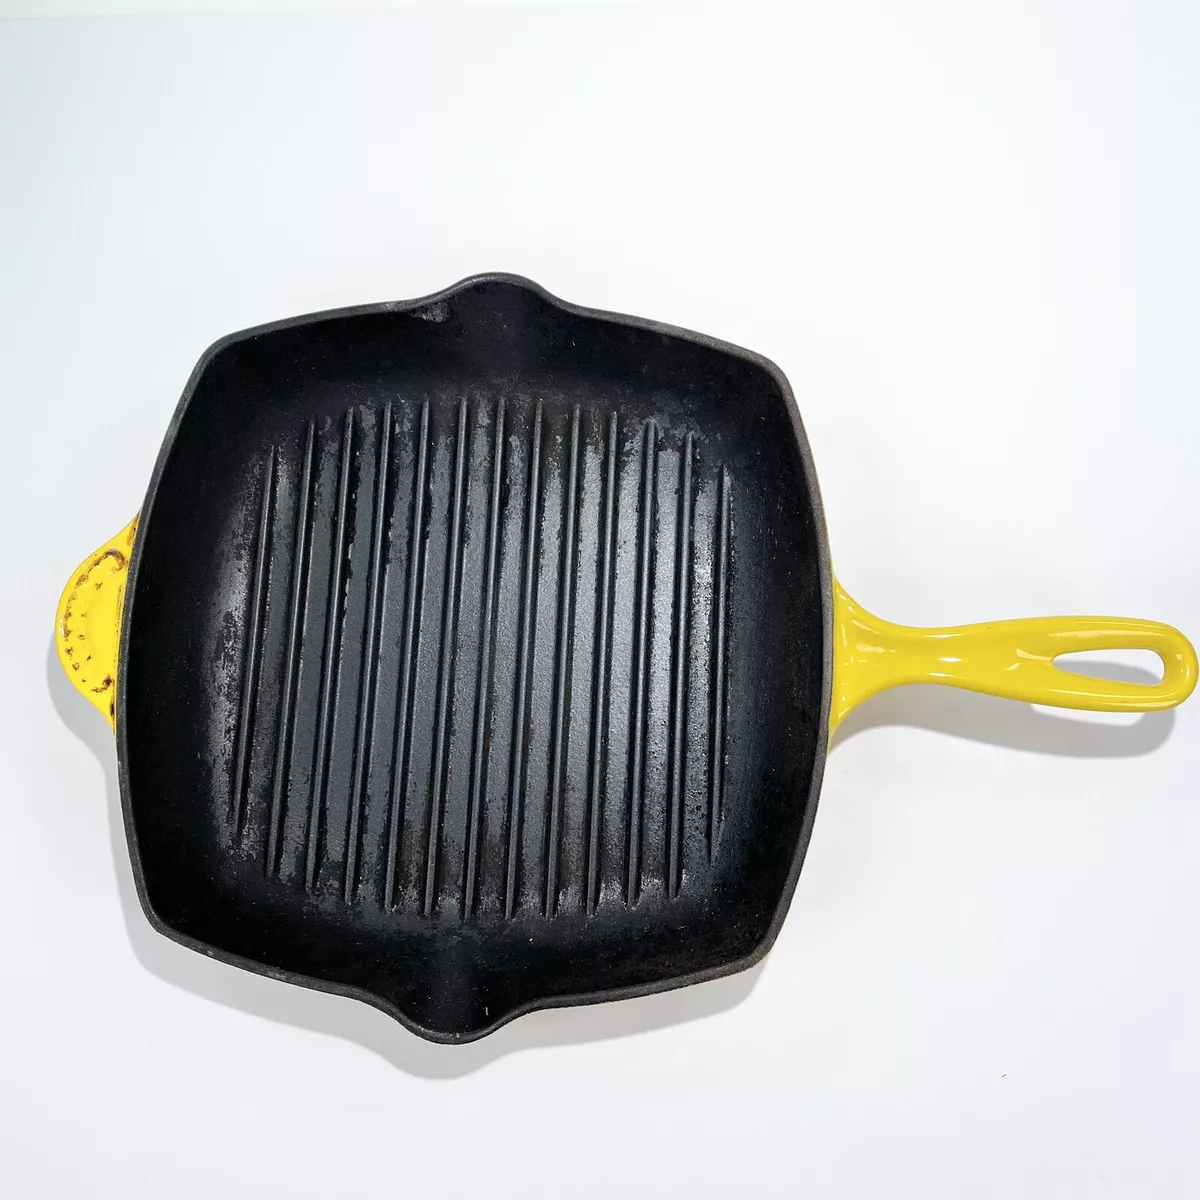 Le Creuset #26 France Yellow Enameled Cast Iron Square Grill Pan Skillet  10